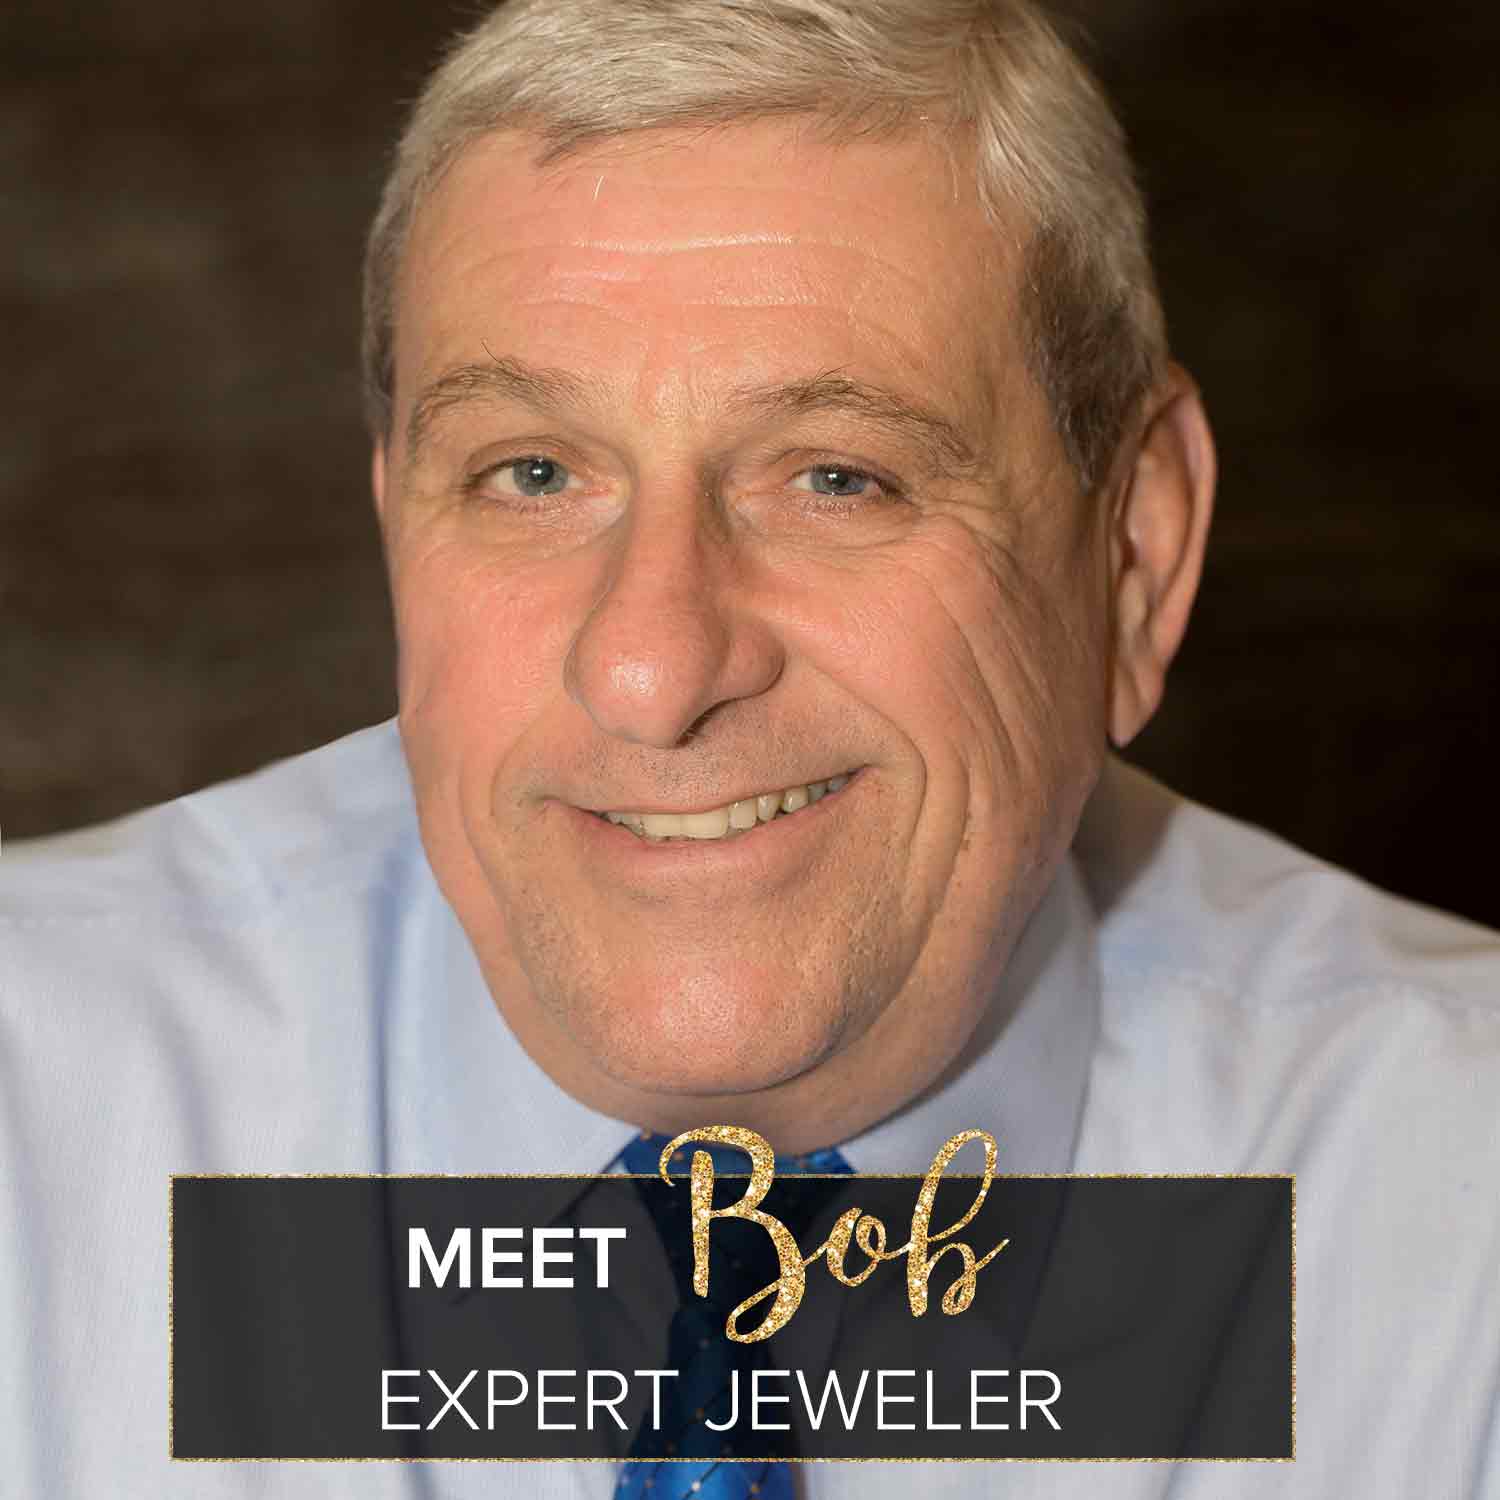 A picture of our expert jeweler, Bob